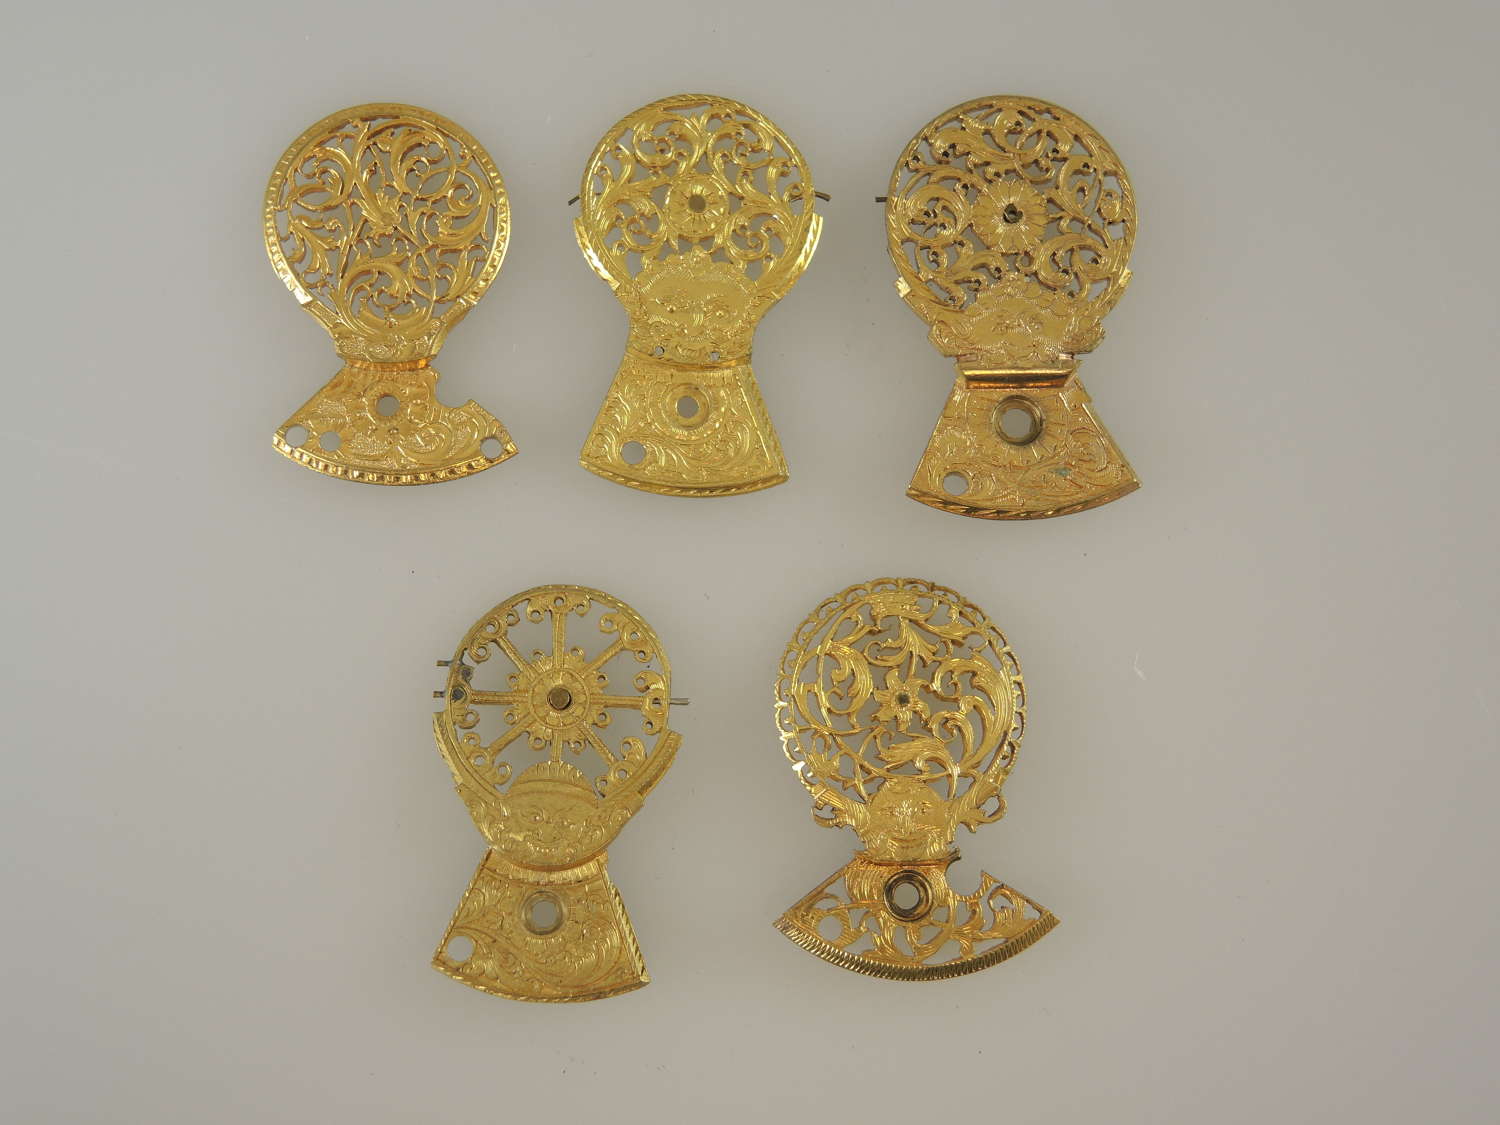 Lot of 5 good examples of verge watch cocks c1750-1830